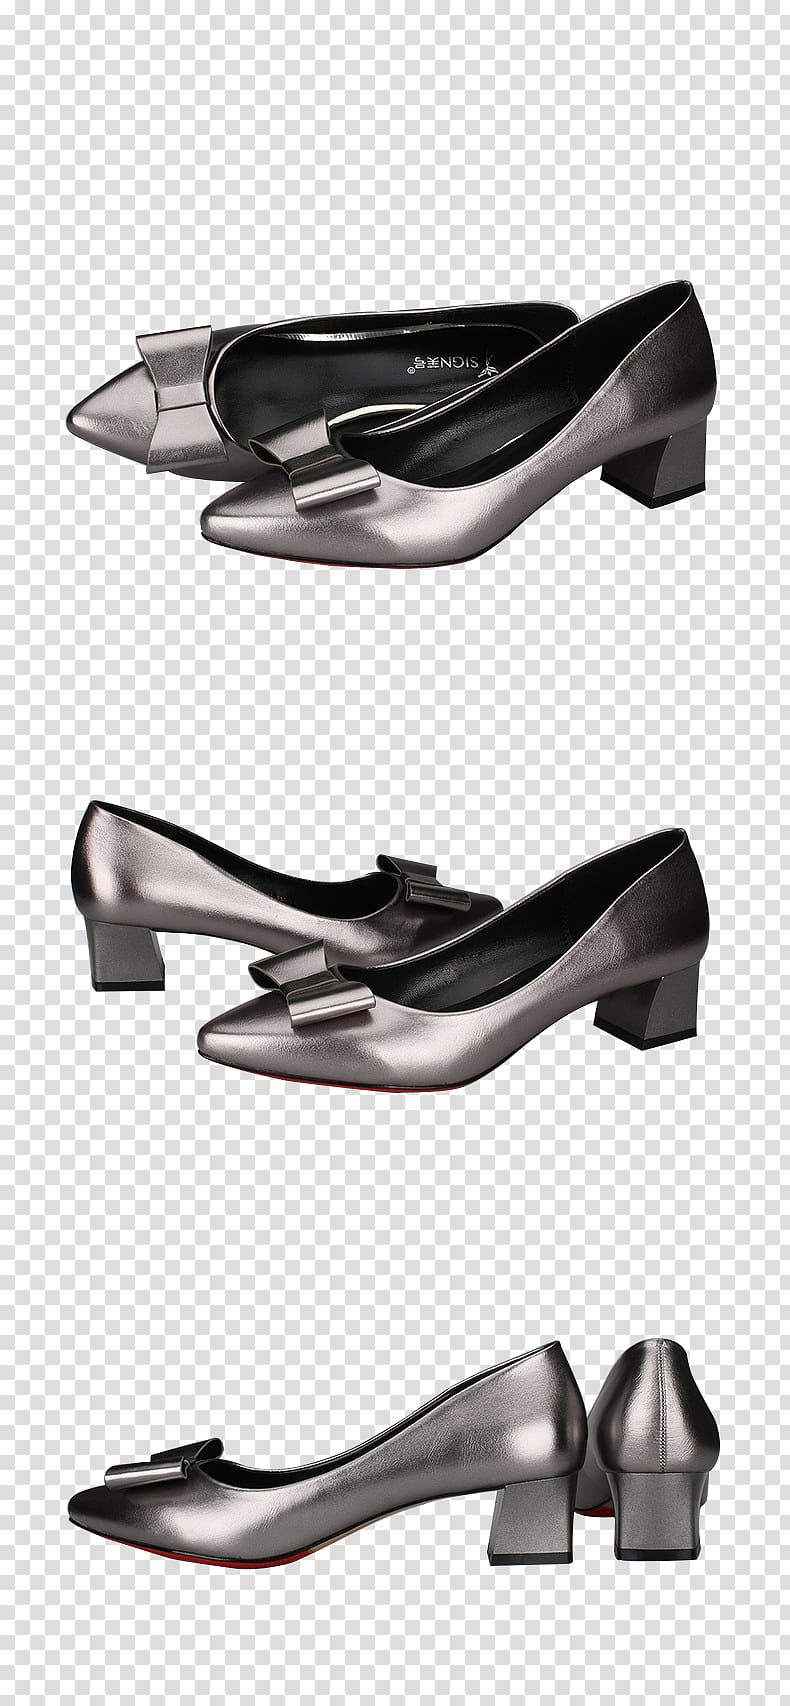 Ballet flat Shoe High-heeled footwear, Silver small shoes at all angles transparent background PNG clipart